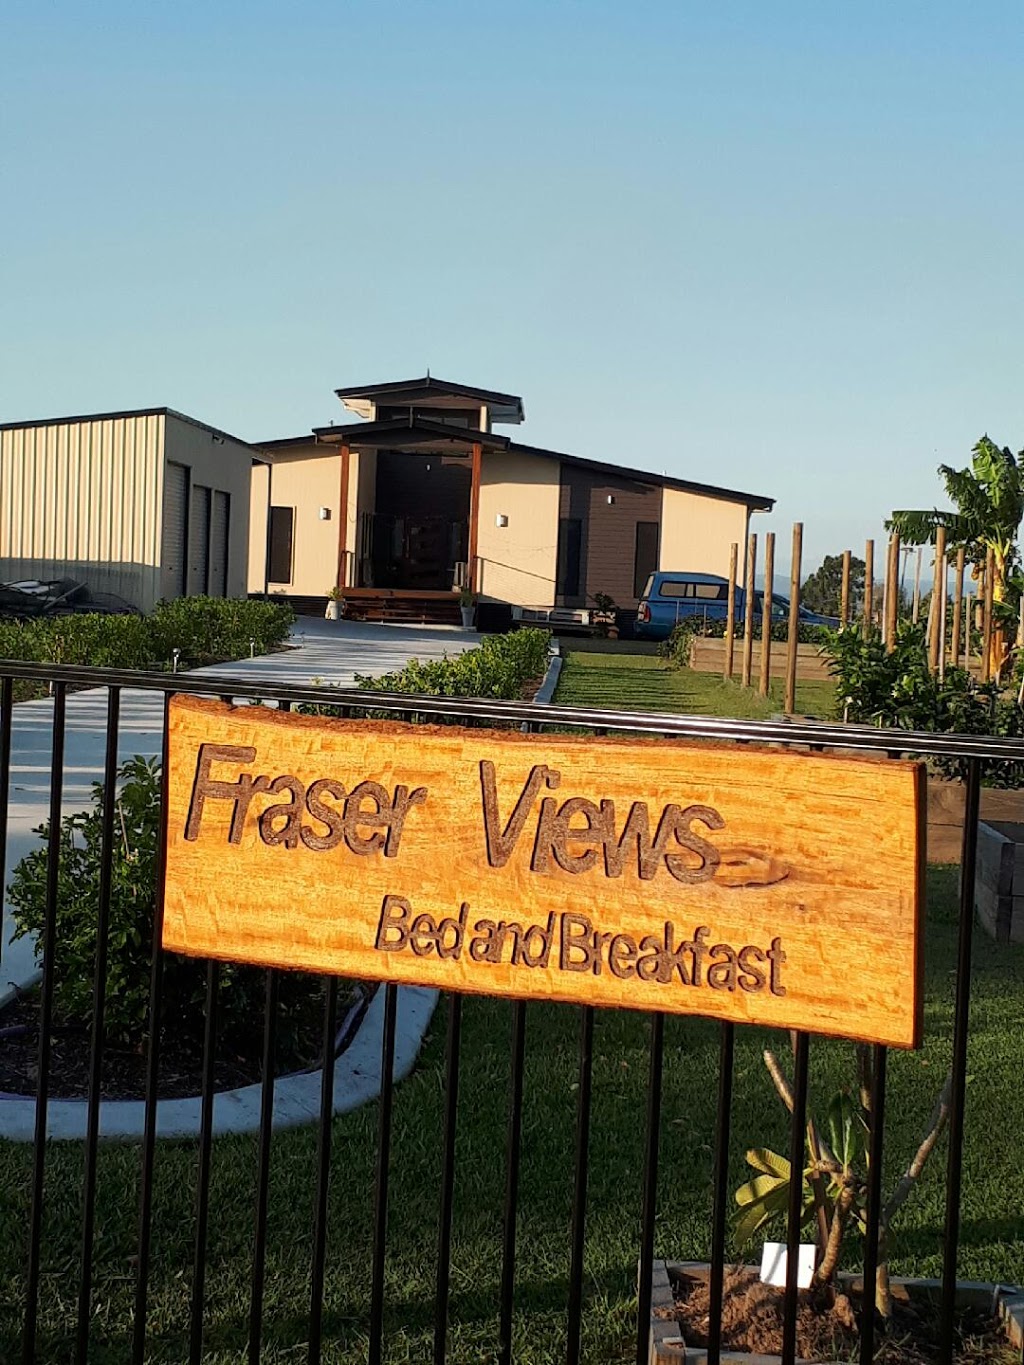 Fraser Views bed and Breakfast | lodging | 69 Seafarer Dr, River Heads QLD 4655, Australia | 0439395157 OR +61 439 395 157